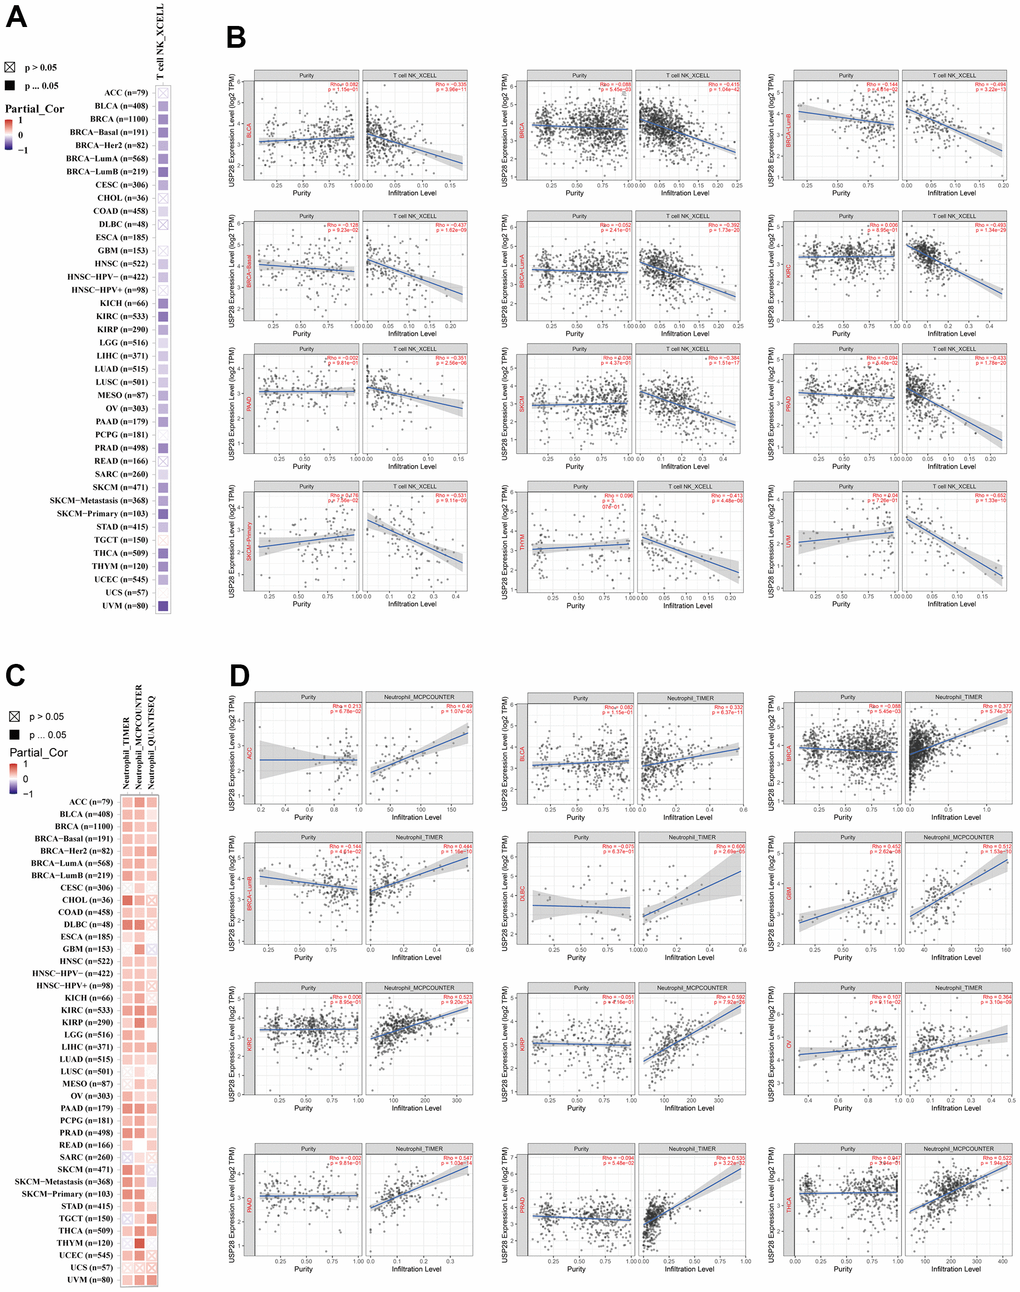 Correlation analysis between USP28 expression and cell infiltration of cancer-associated fibroblast. The potential connection between the expression level of the USP28 gene and the infiltration level of T cell NK (A, B) and neutrophil (C, D) was used to explore based on different algorithms in the TIMER database.